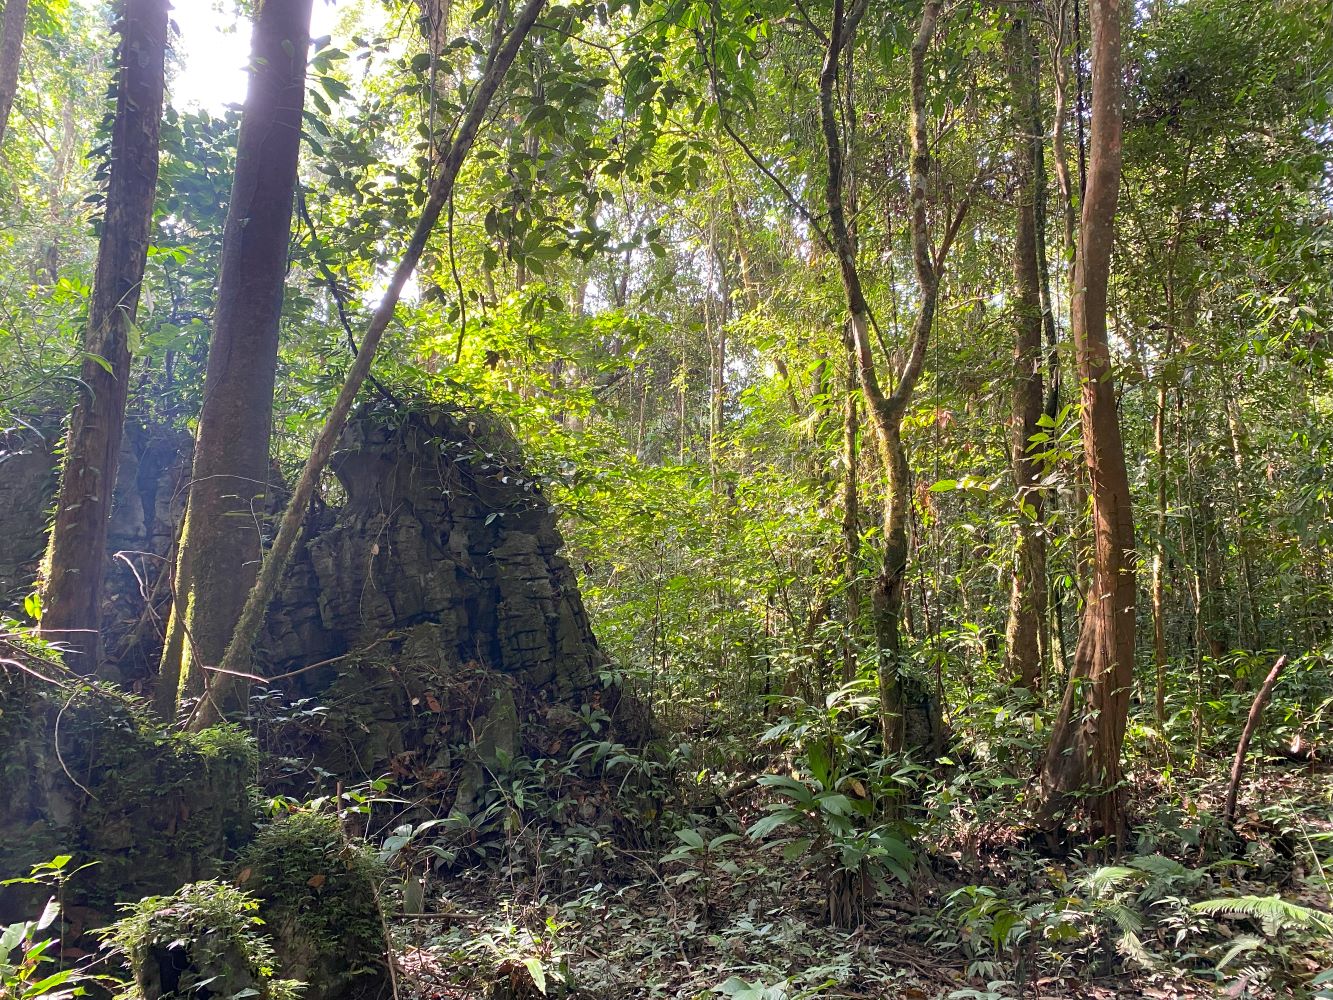 3 weeks in Borneo: Mulu National Park, day 2